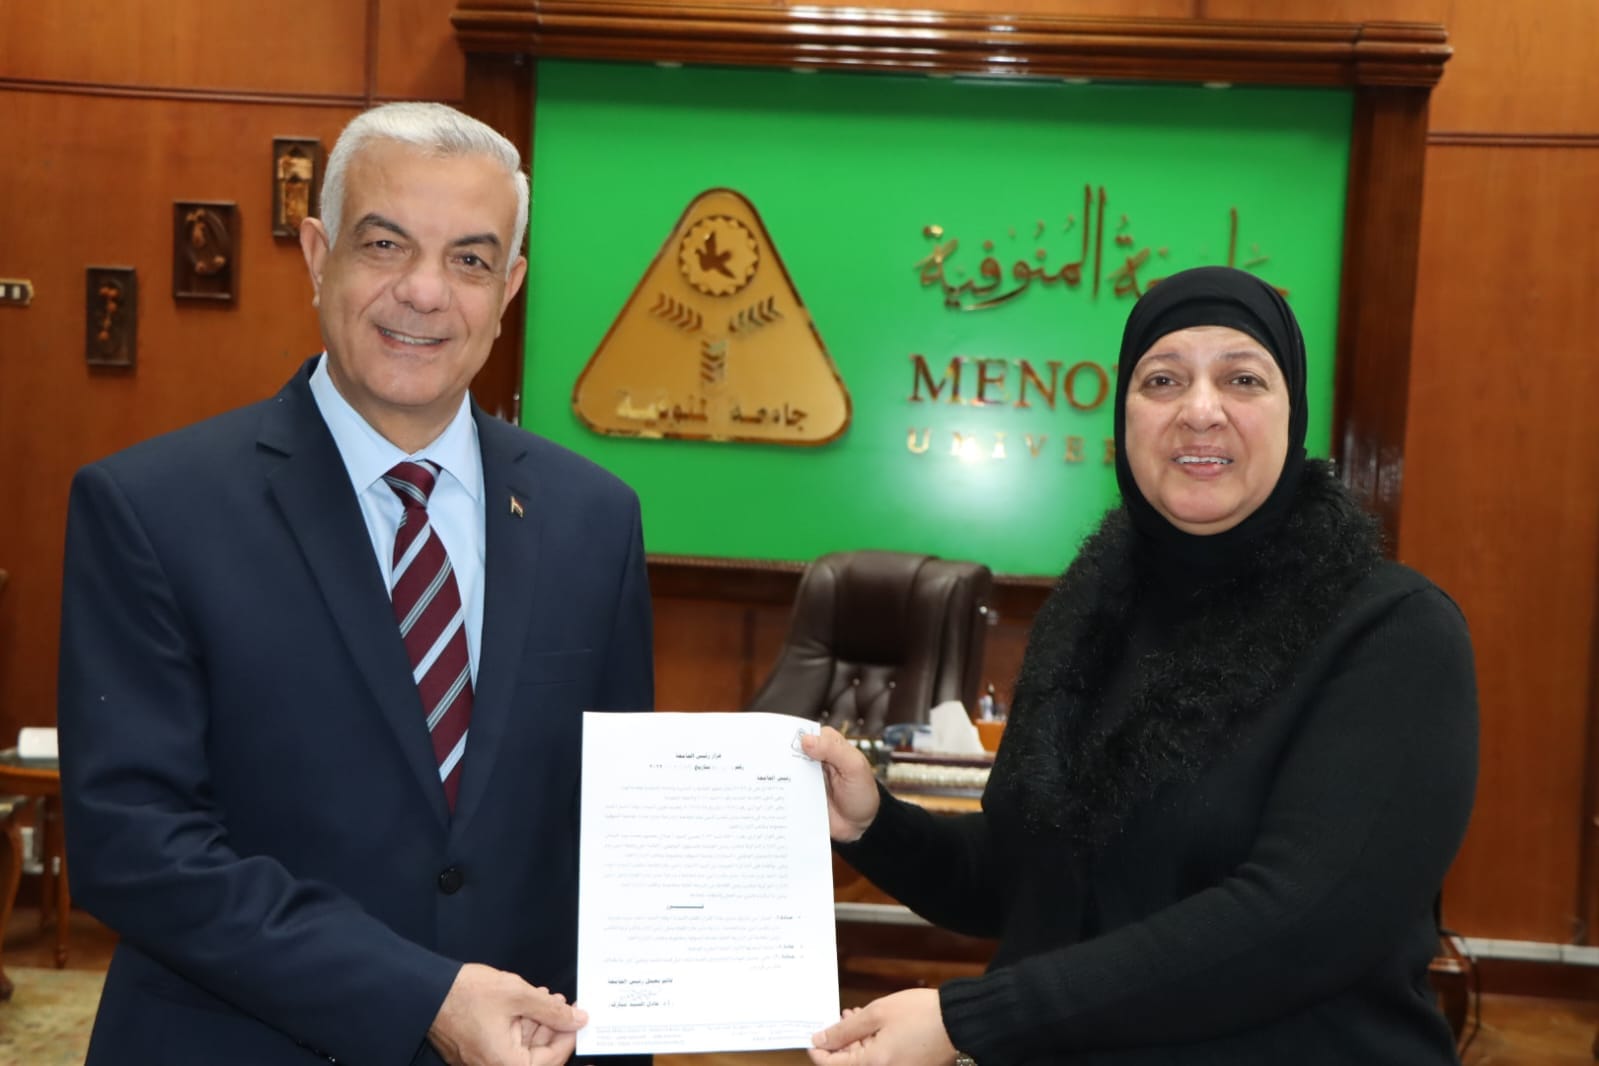 Wafa Azab, Head of the Central Administration of the Office of the President of Menoufia University